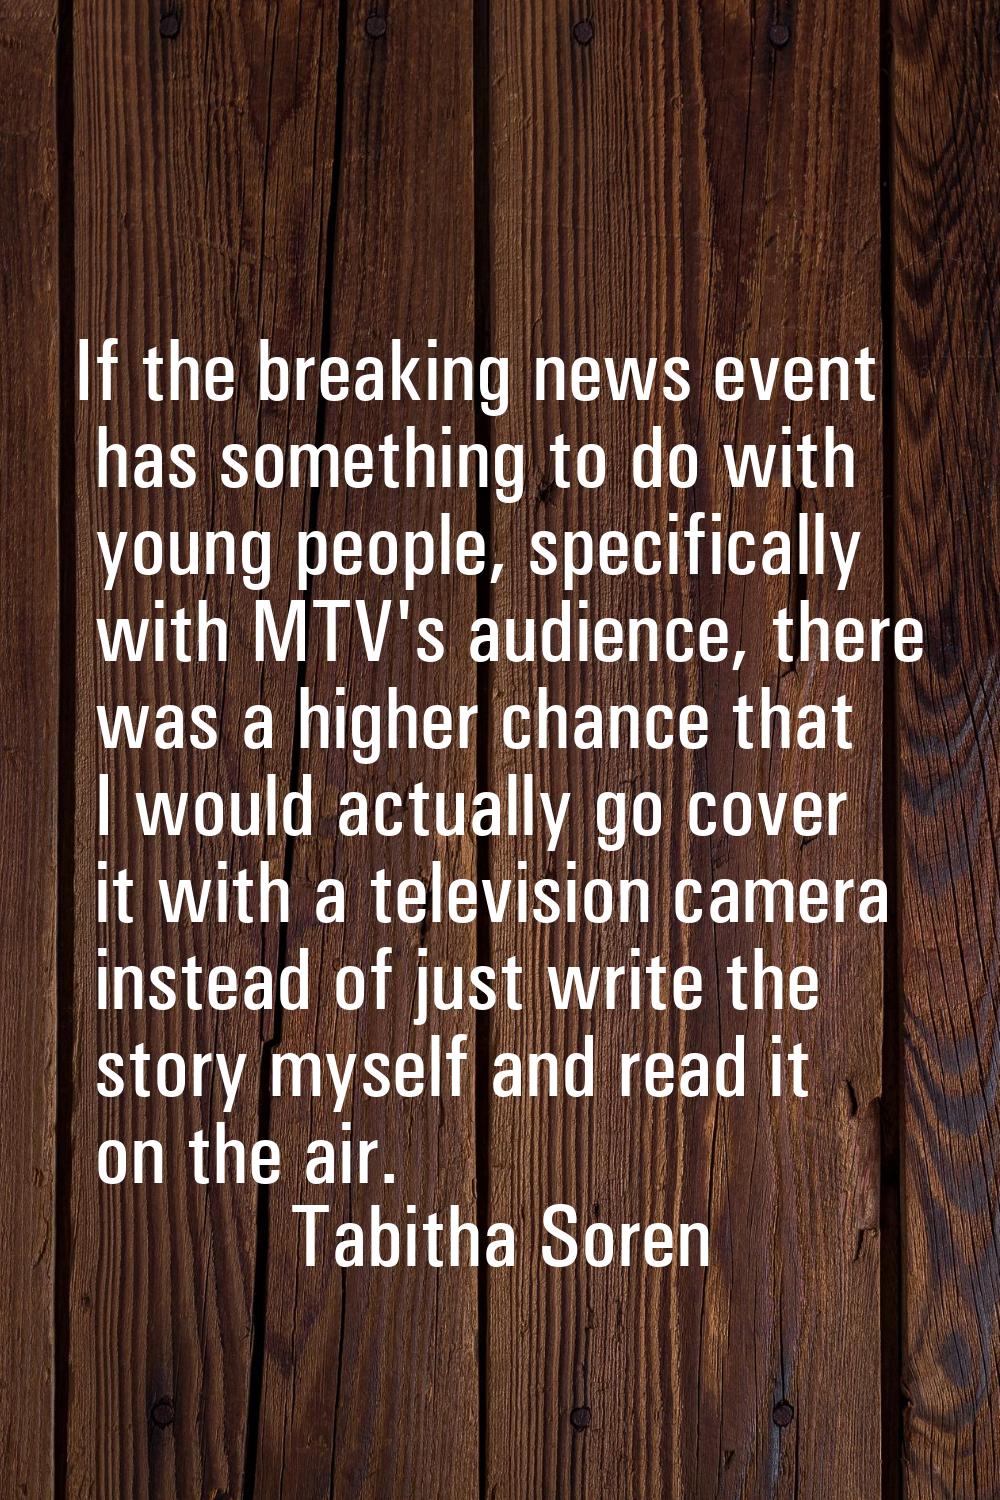 If the breaking news event has something to do with young people, specifically with MTV's audience,